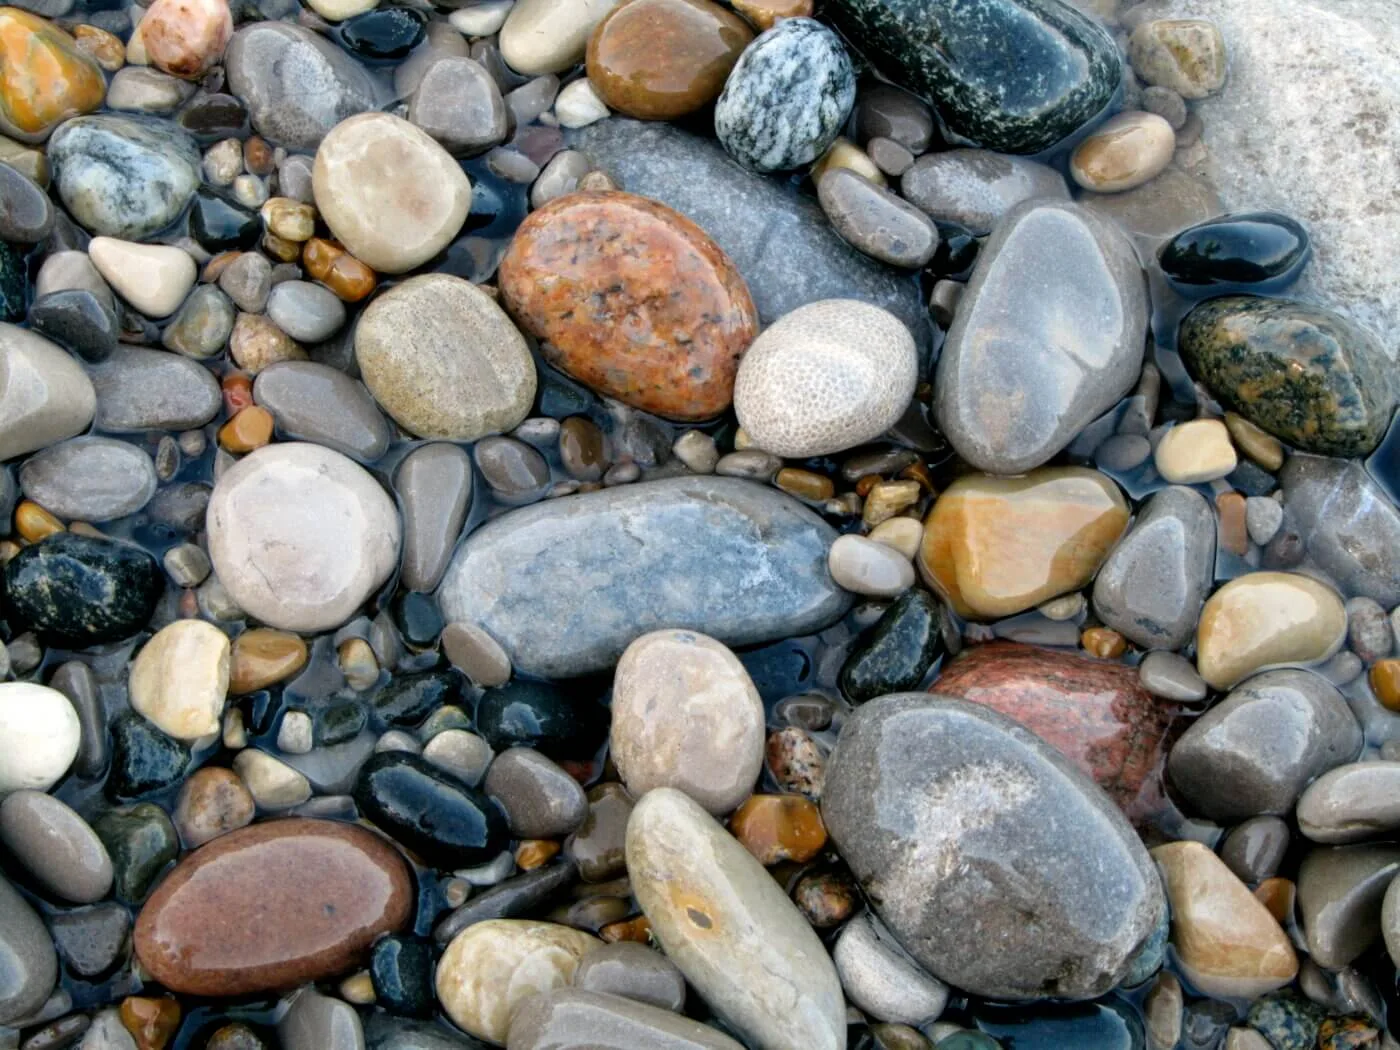 Michigan Rock Hunting: Seven Local Stones to Search For